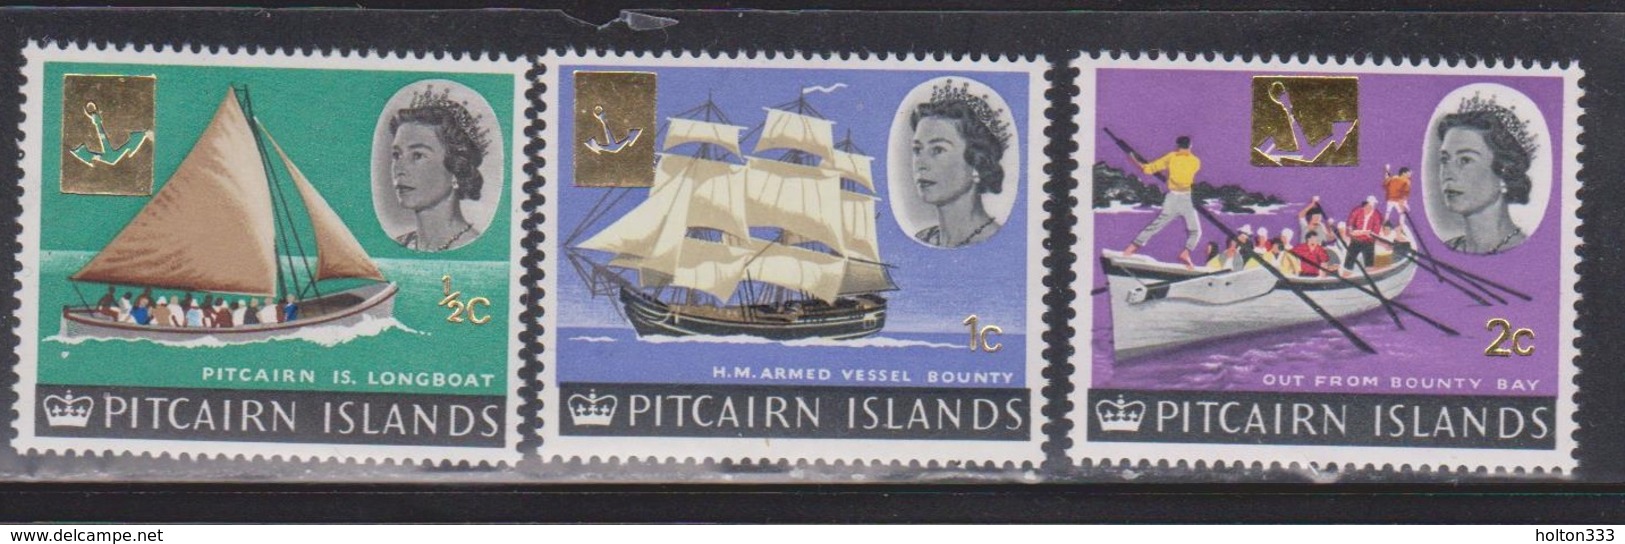 PITCAIRN ISLANDS Scott # 72-4 MH - QEII & Ships New Value In Cents - Pitcairn Islands